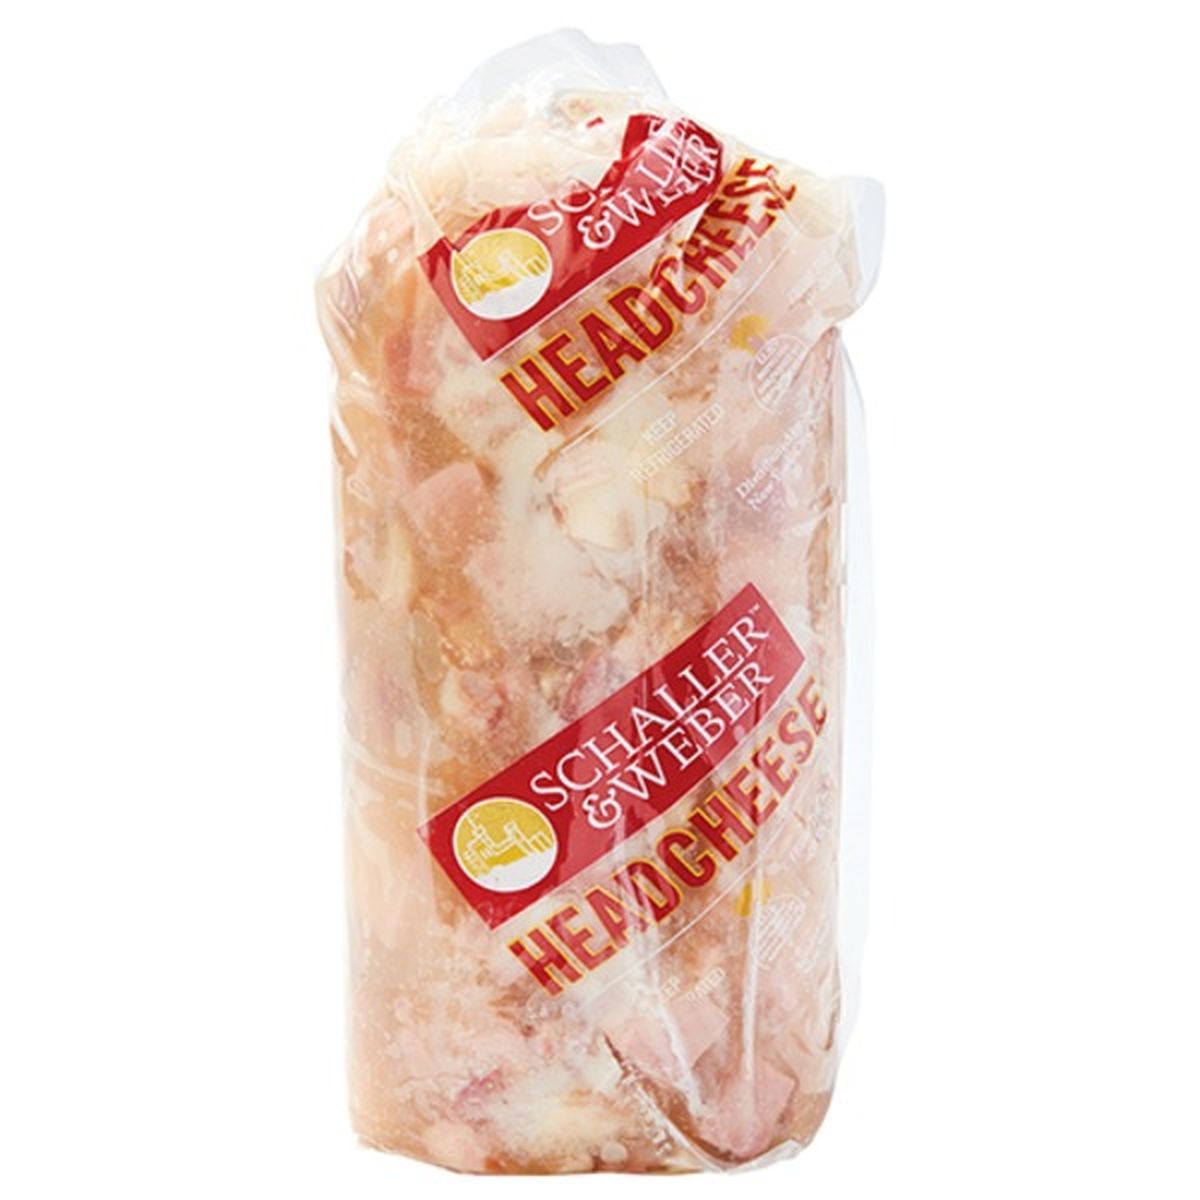 Calories in S&W Headcheese